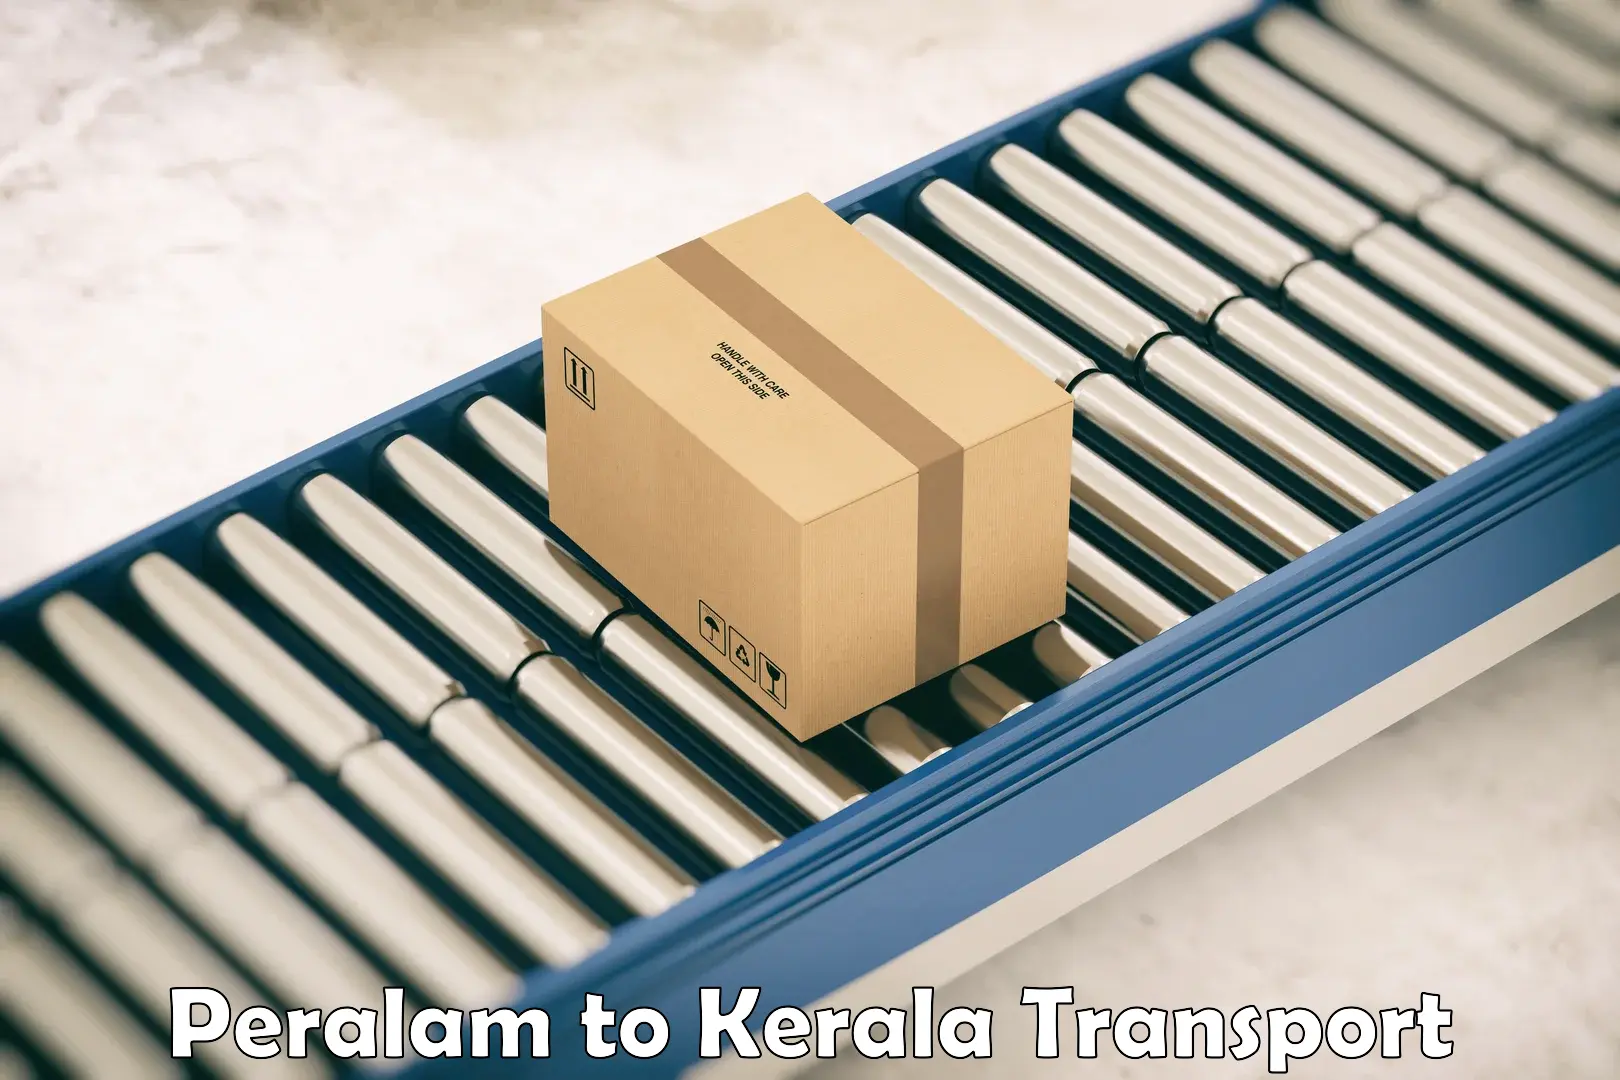 Daily parcel service transport Peralam to Malappuram